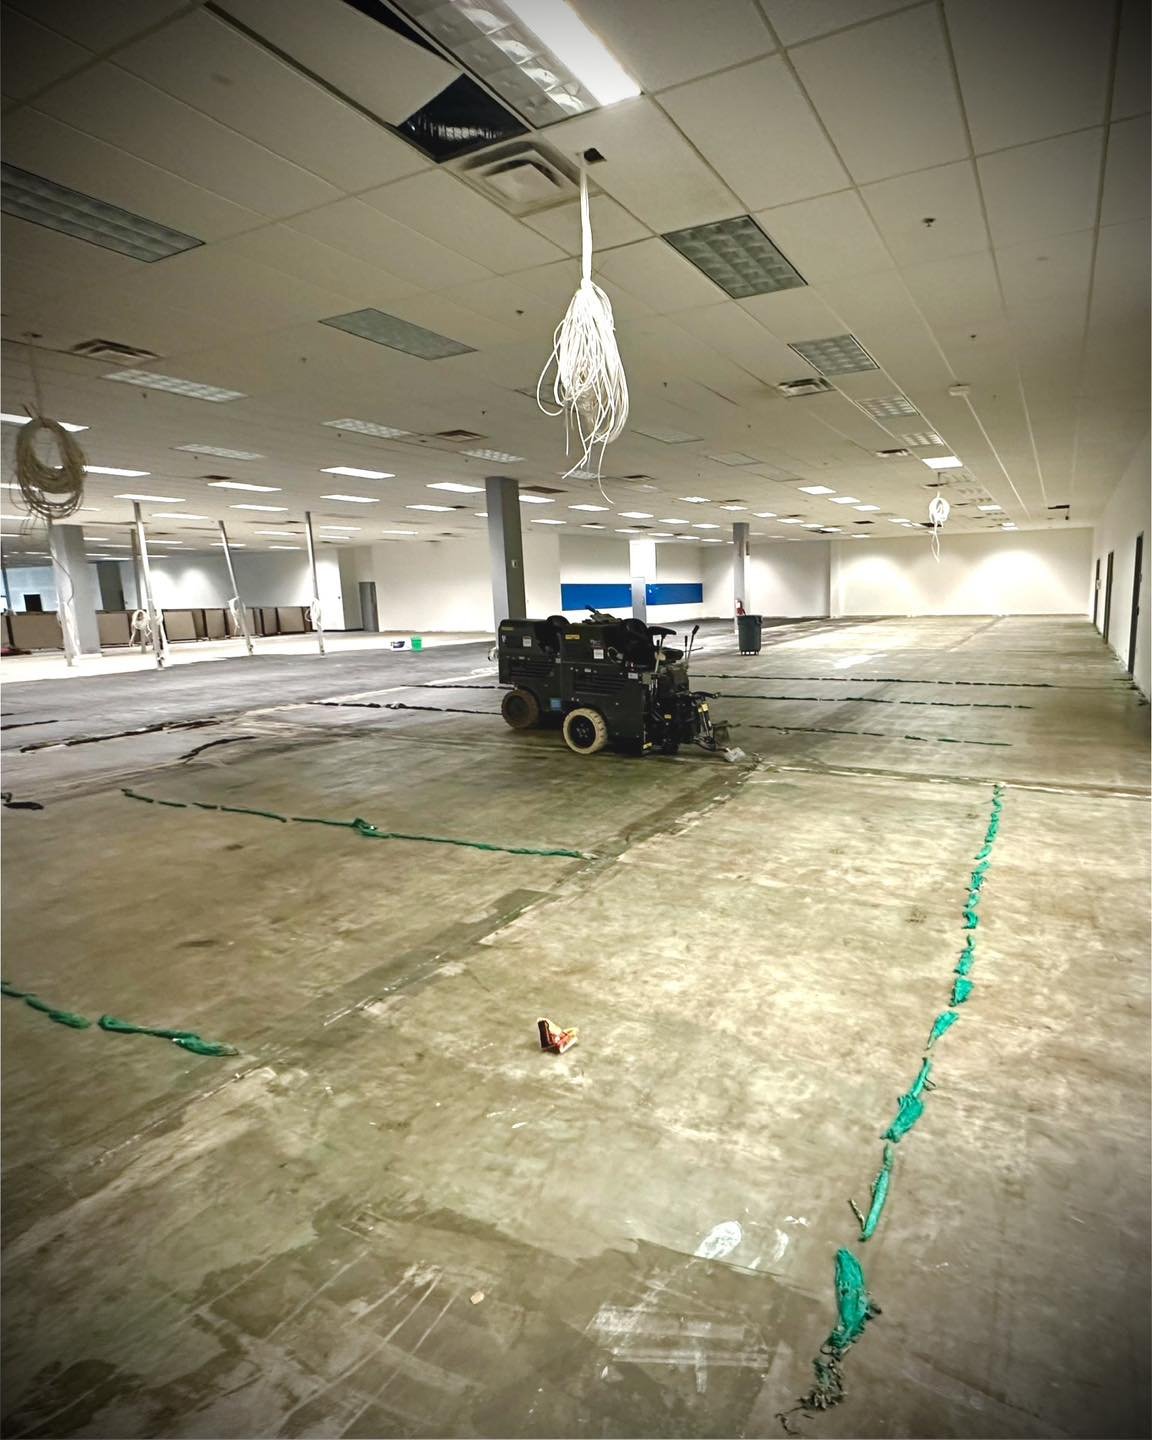 Need the flooring in your commercial space gone fast? We've got the tools to make it disappear in a snap!  #westmichiganflooringcontractors #westmichiganflooring #renovation #flooringsolutions #flooringcontractor #flooringexperts #settingthestandard 